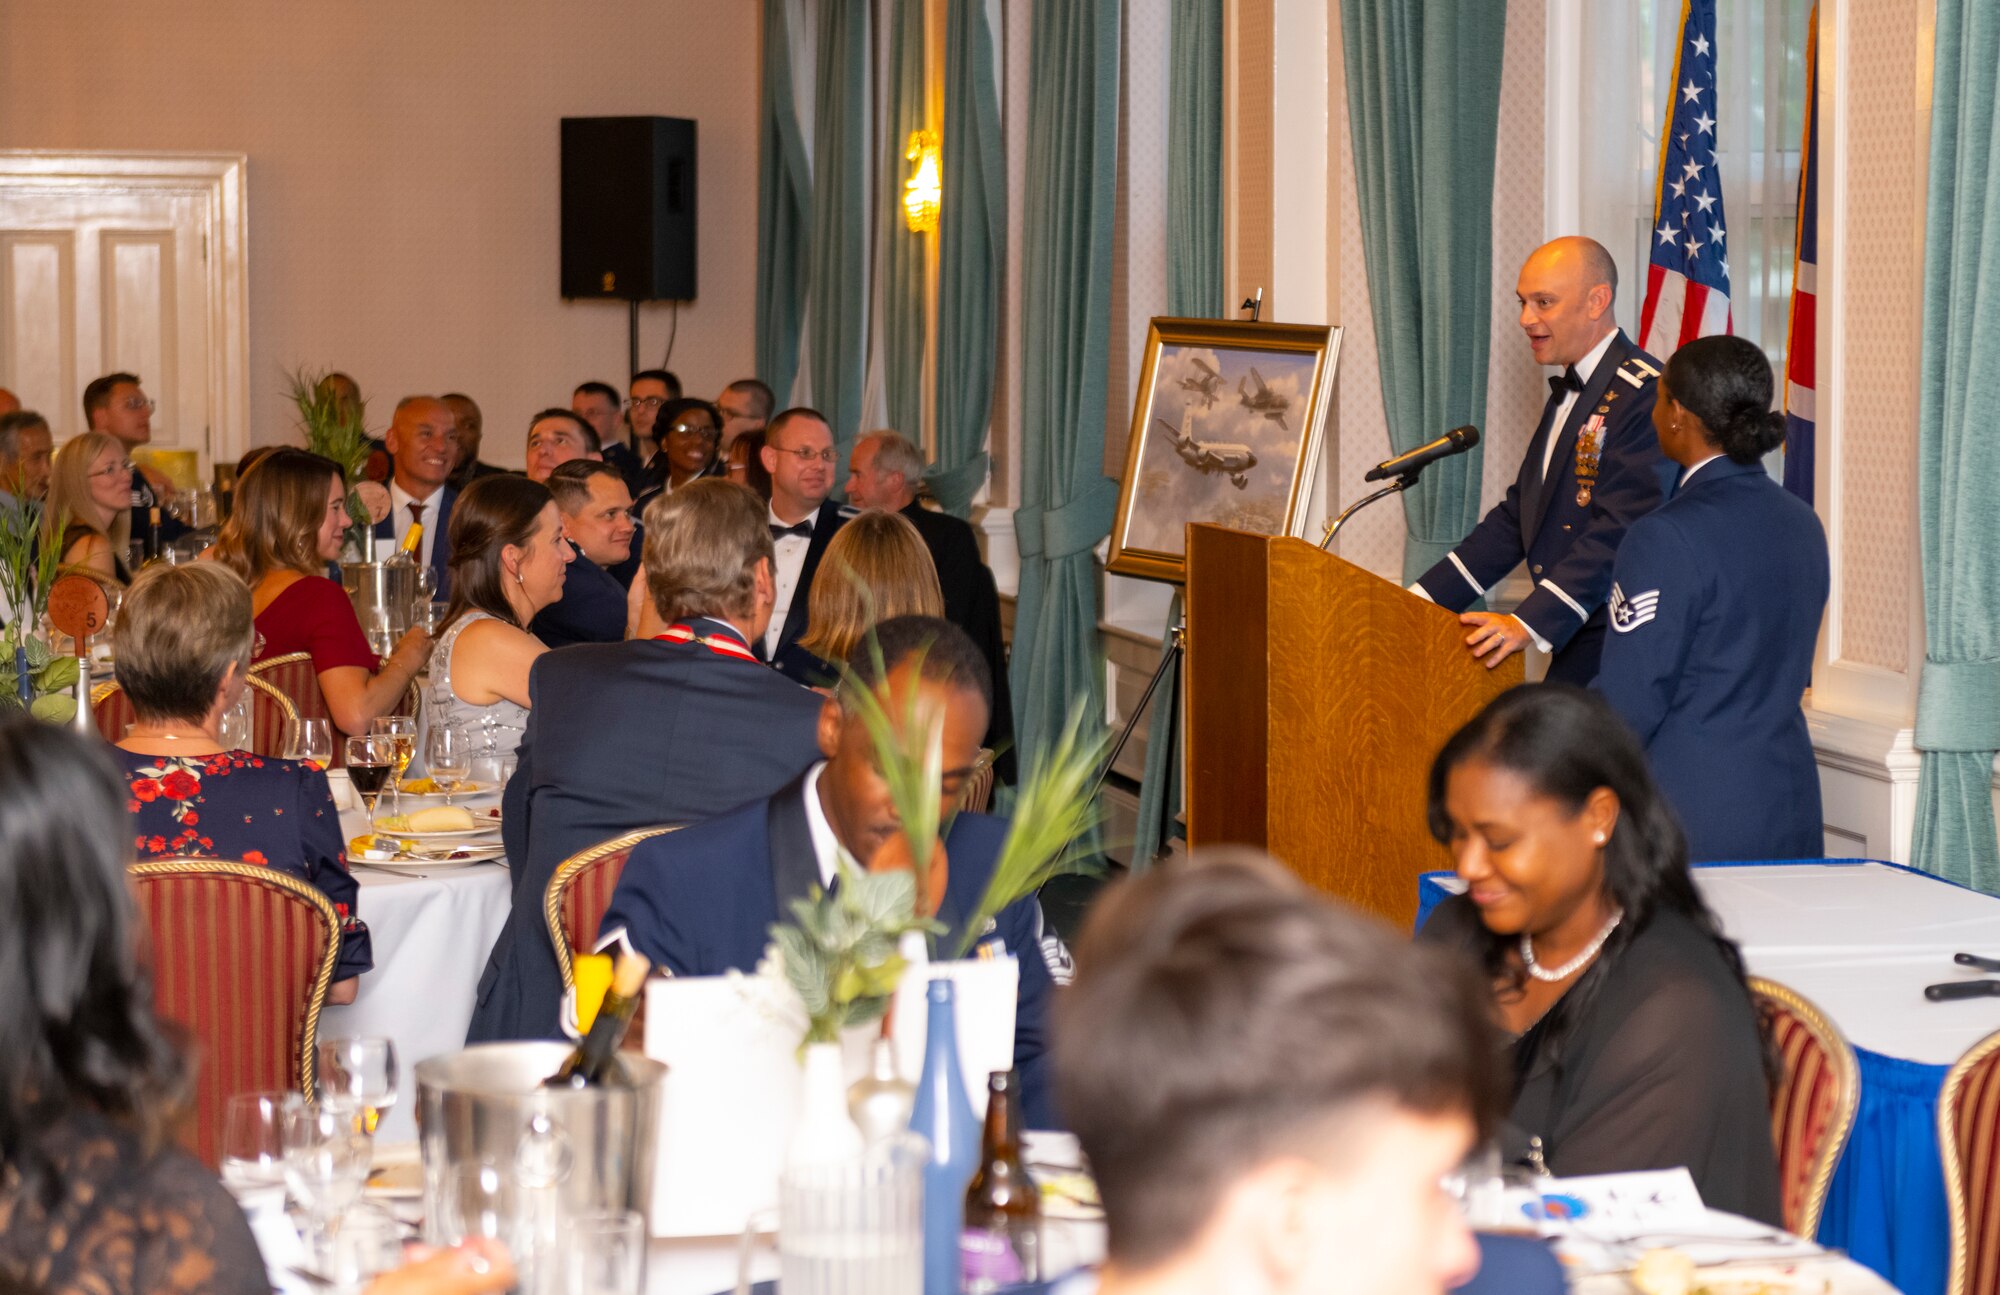 U.S. Air Force Lt. Col. Jonathan Beha, 95th Reconnaissance Squadron commander, speaks to guests during the 95th RS’s 105th anniversary celebration at Royal Air Force Mildenhall, England, Aug. 19, 2022. When asked about what has changed since the 95th RS’s first activation in 1917, Beha said, “the technology is certainly different, but I think what hasn’t changed is the commitment to the mission and the commitment the Airmen have to each other.”